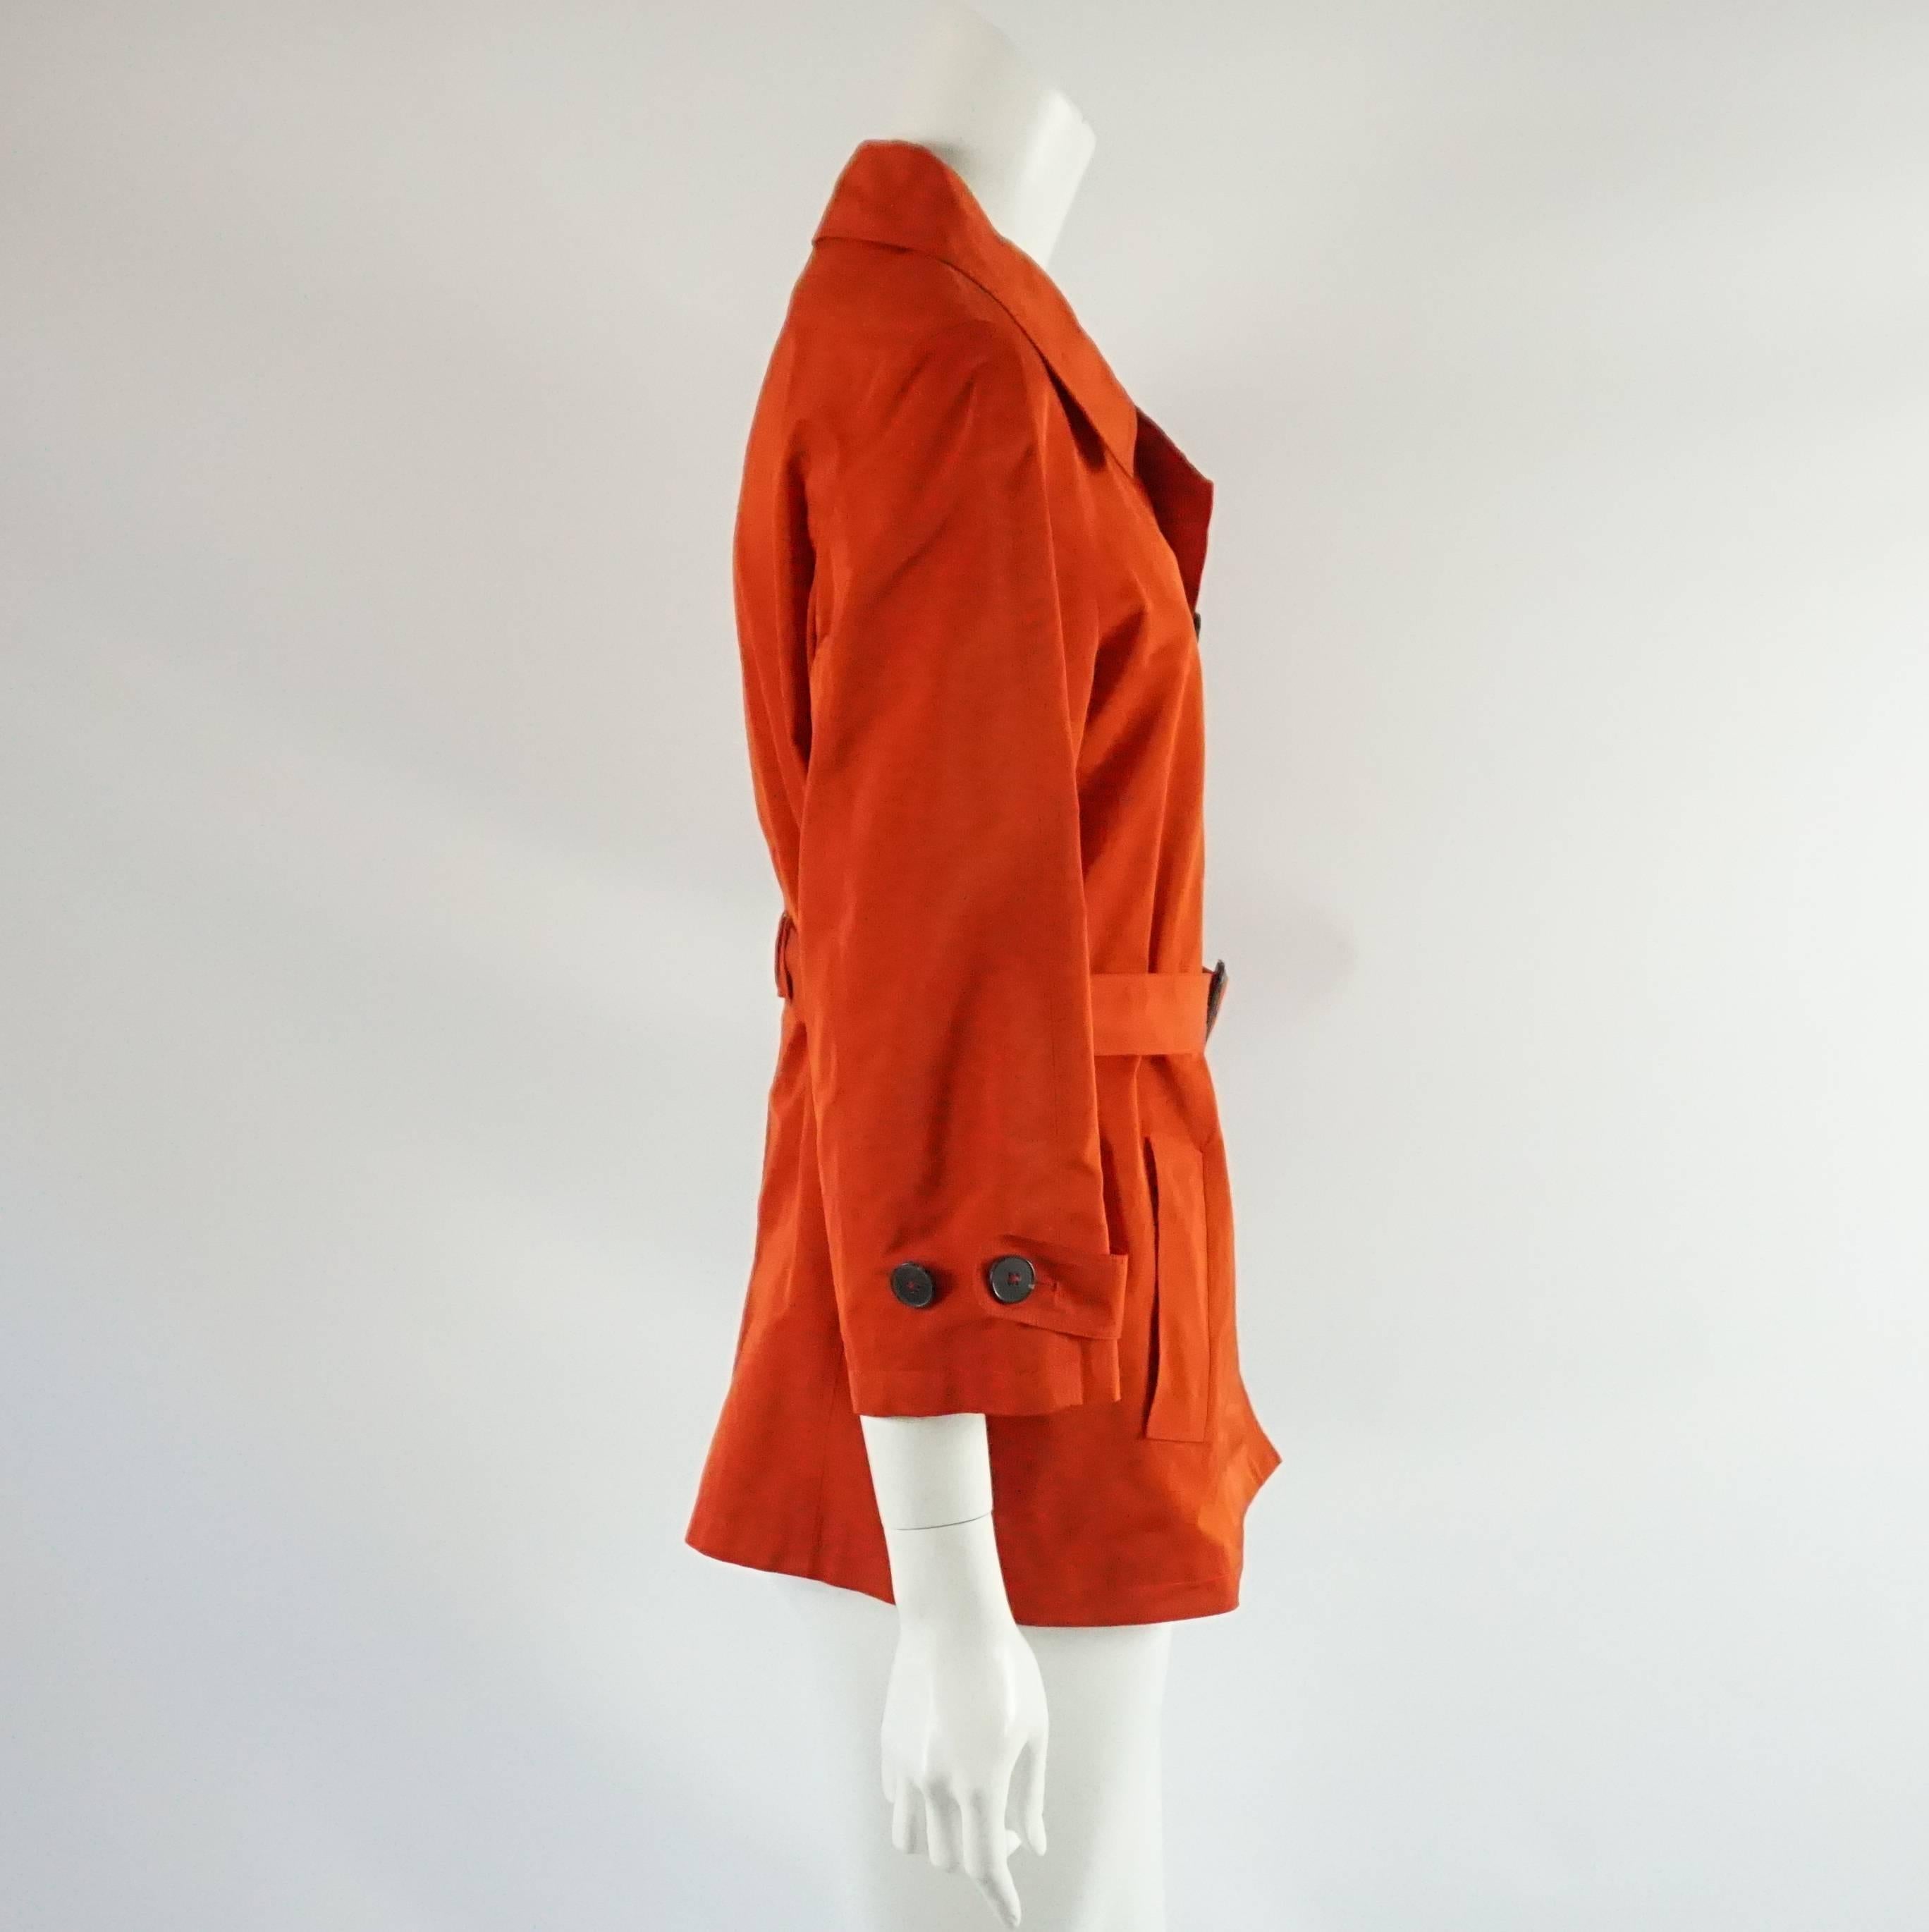 This beautiful Jil Sander long jacket is red silk blend. It has 6 buttons going down the front and two buttons on each sleeve. There is a belt with a buckle that matches the buttons. There are two pockets on the front. This jacket is in very good